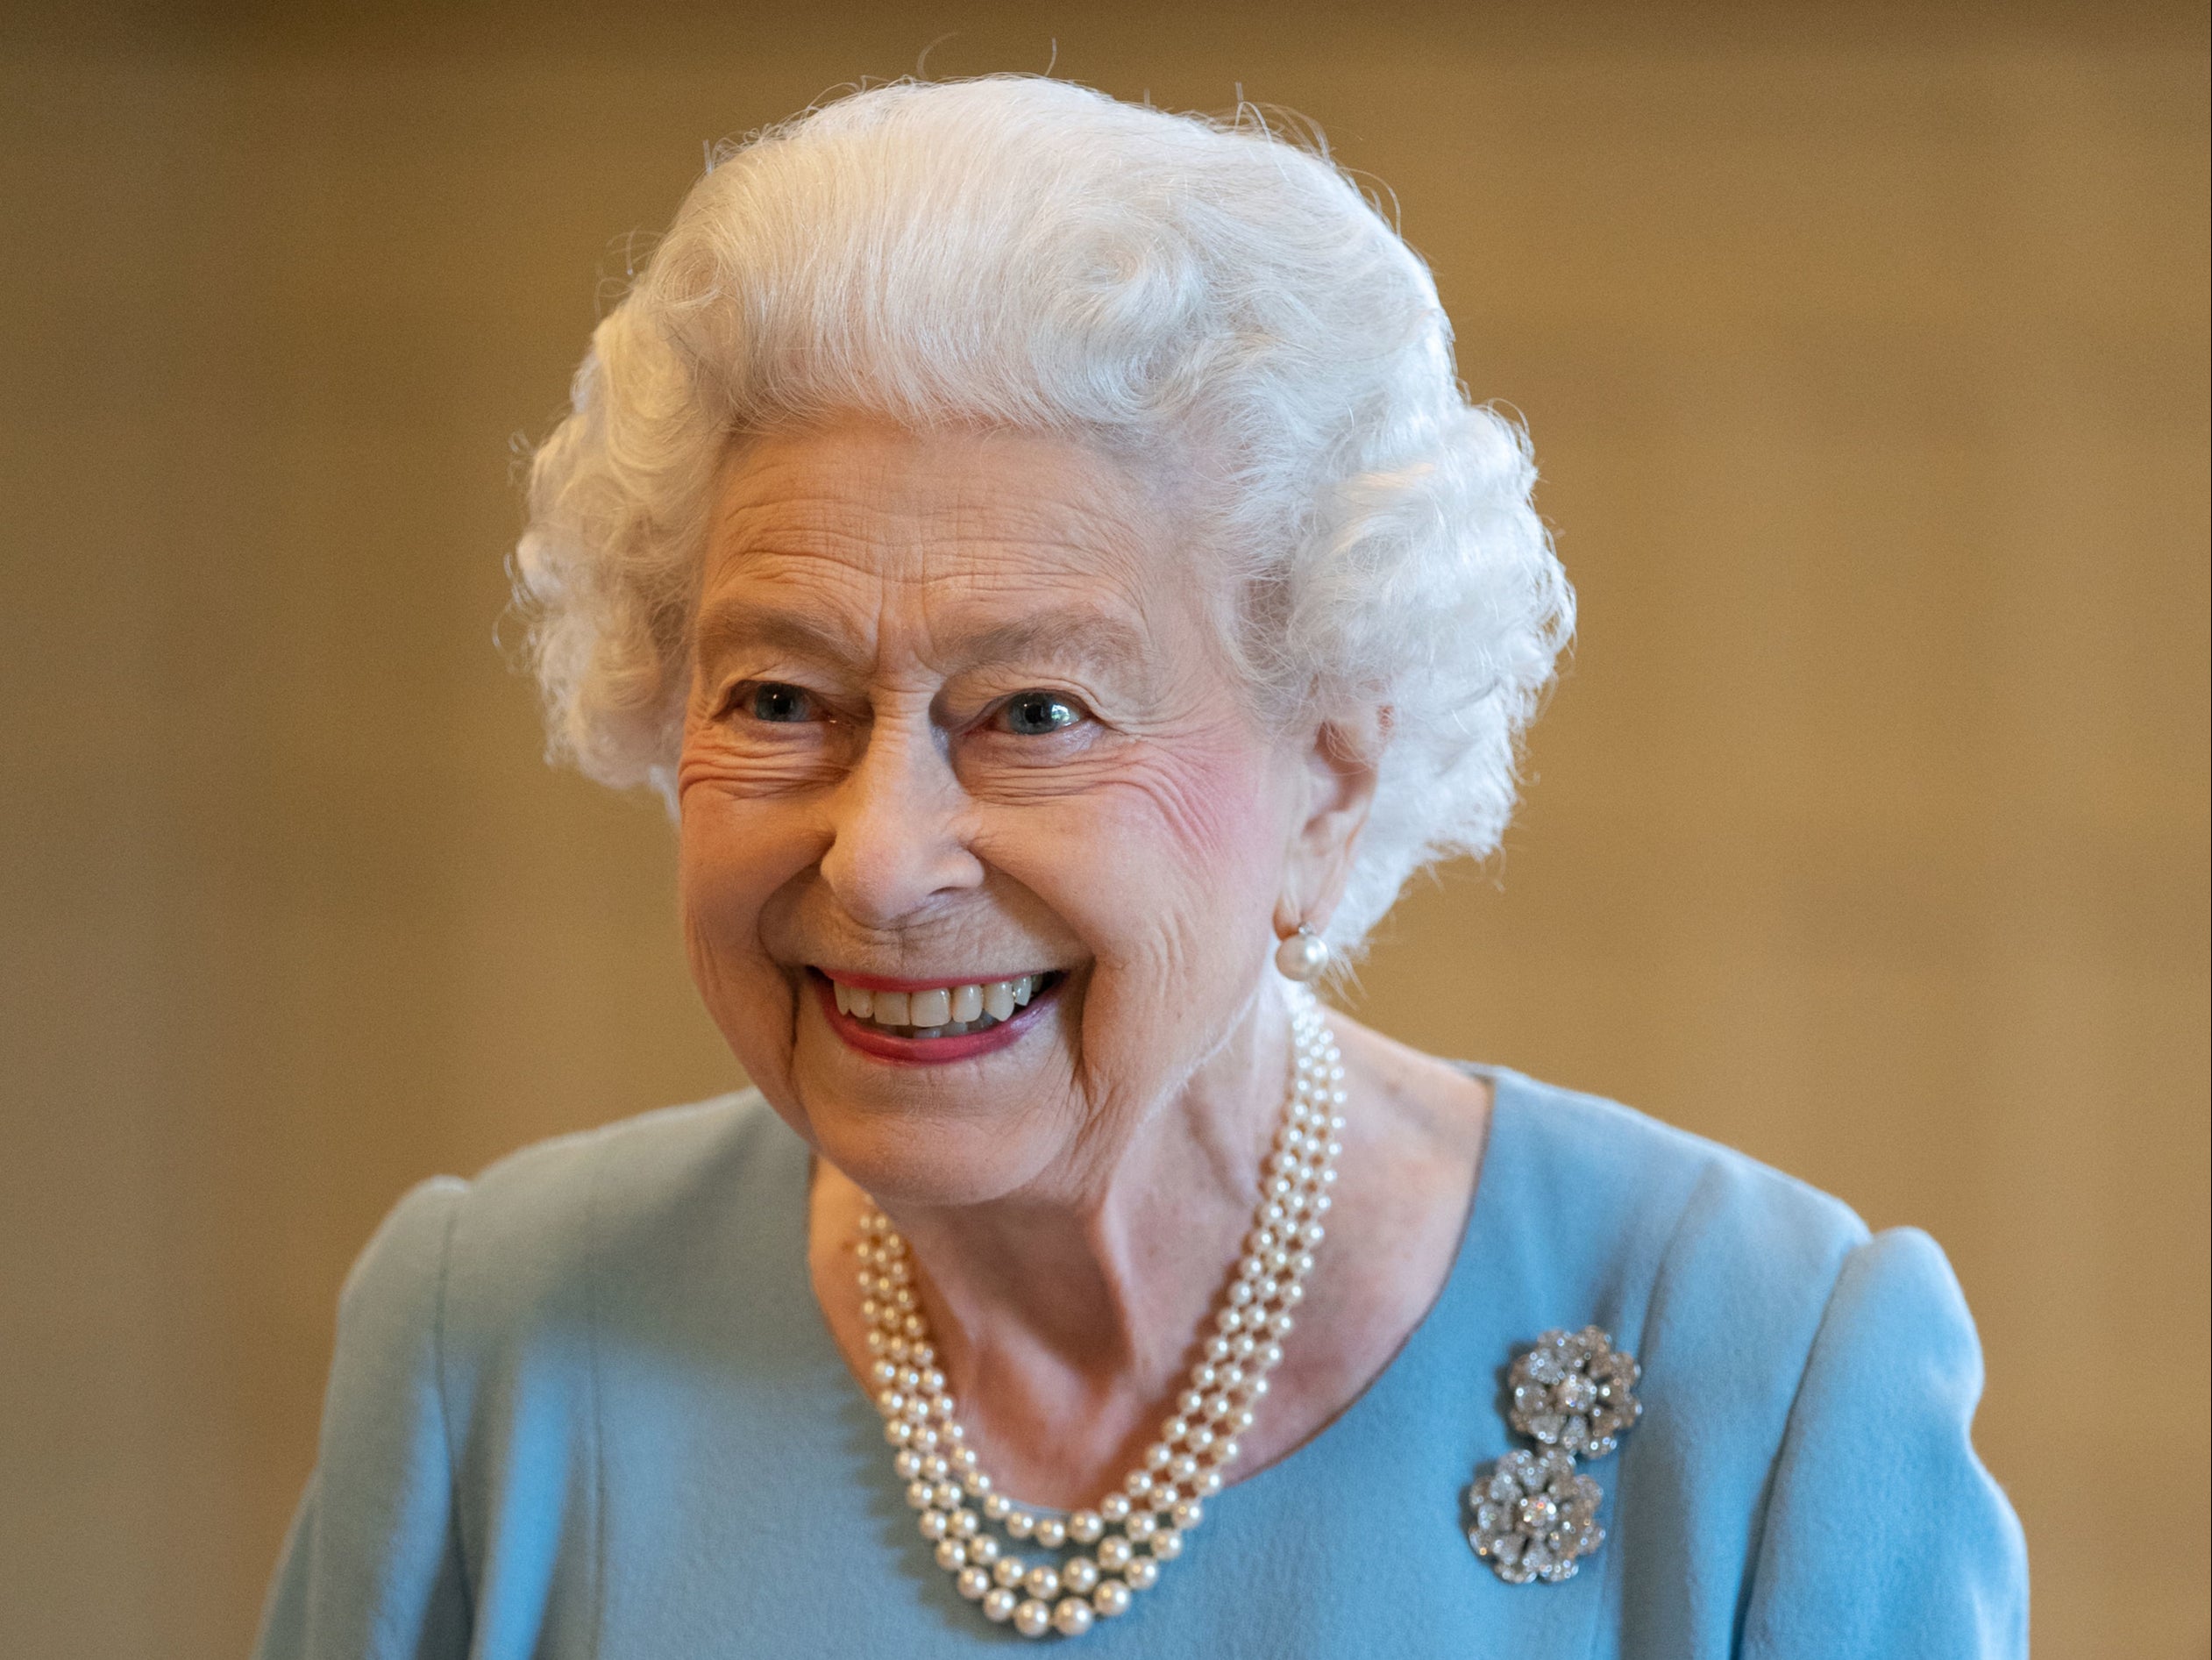 The Queen in February 2022